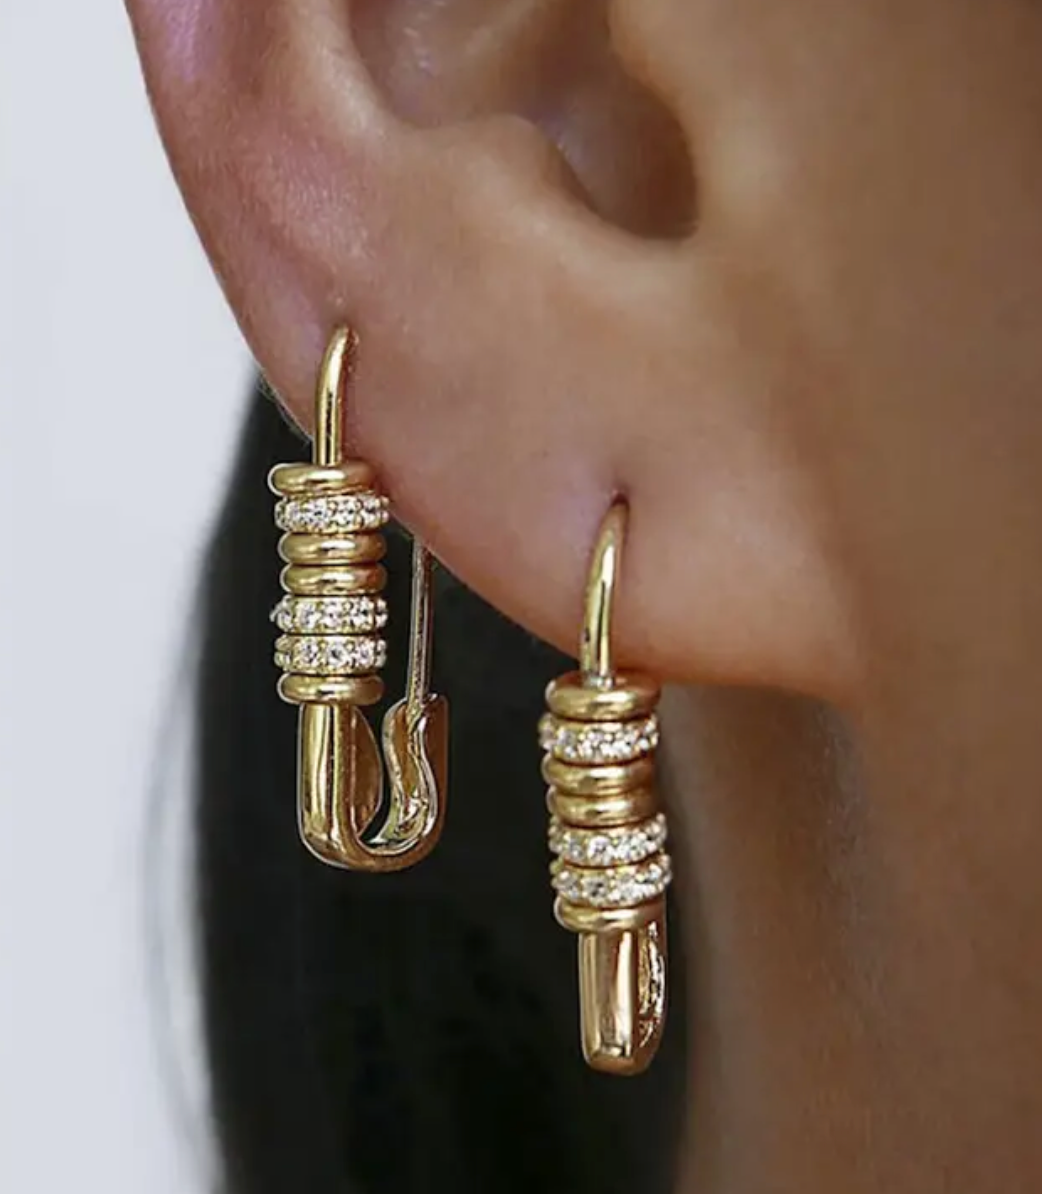 safety pin earrings with beads